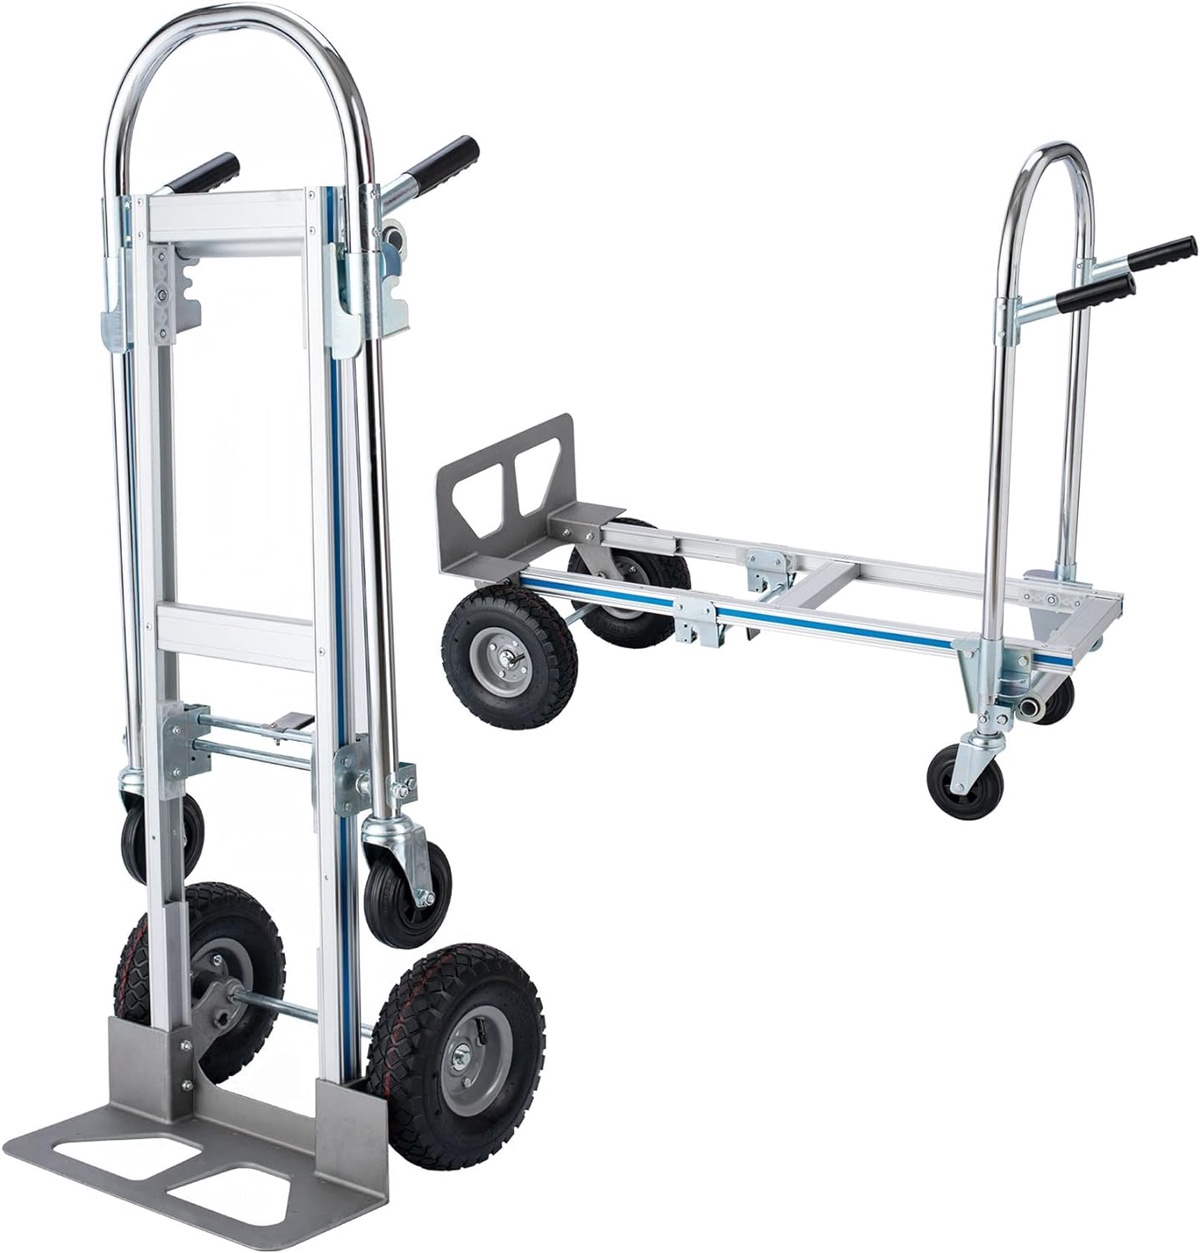 Tips for Safely and Efficiently Using Hand Truck Stair Climbers